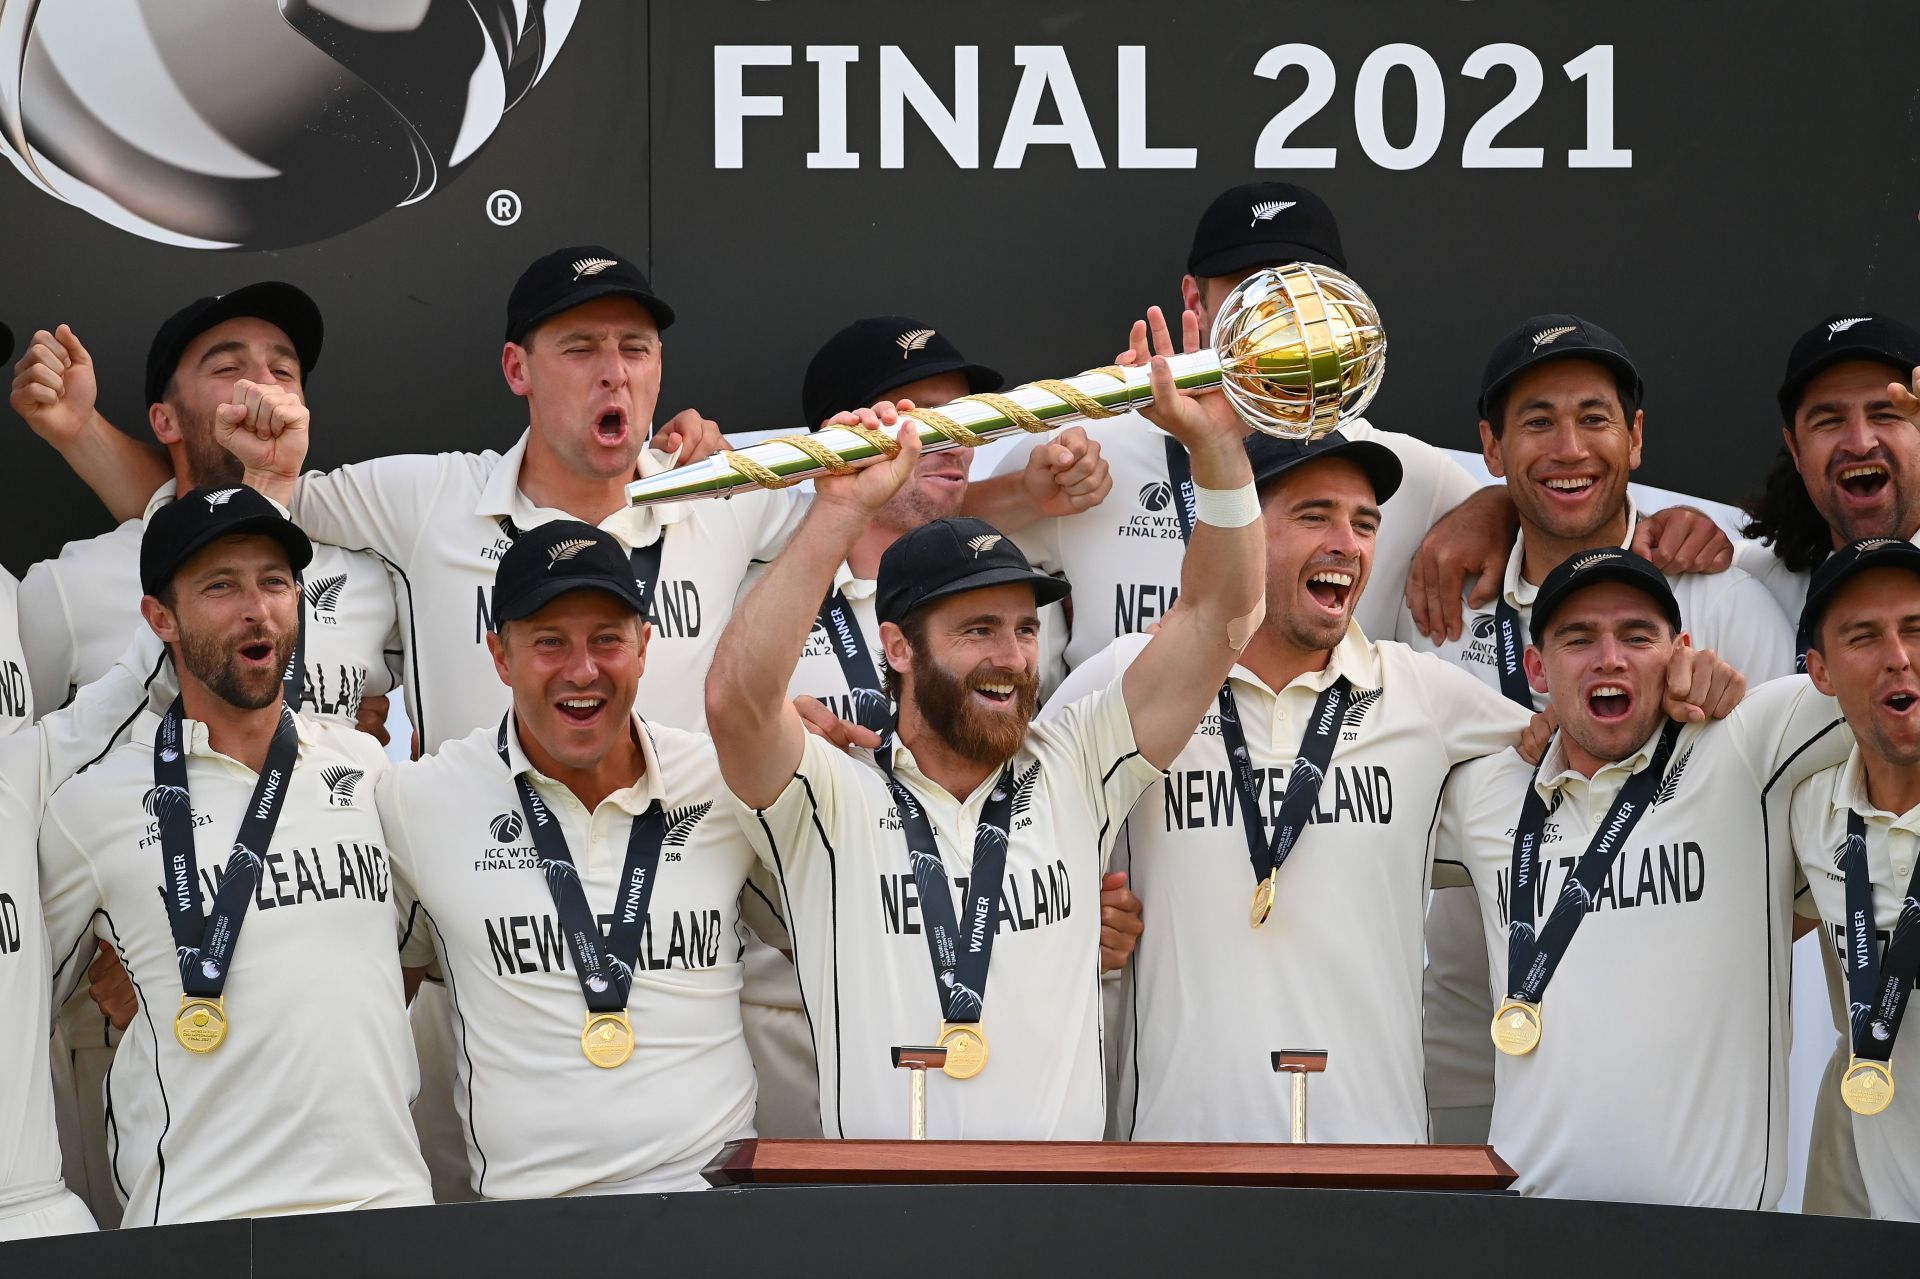 New Zealand are the reigning world Test champions. They beat India in the final